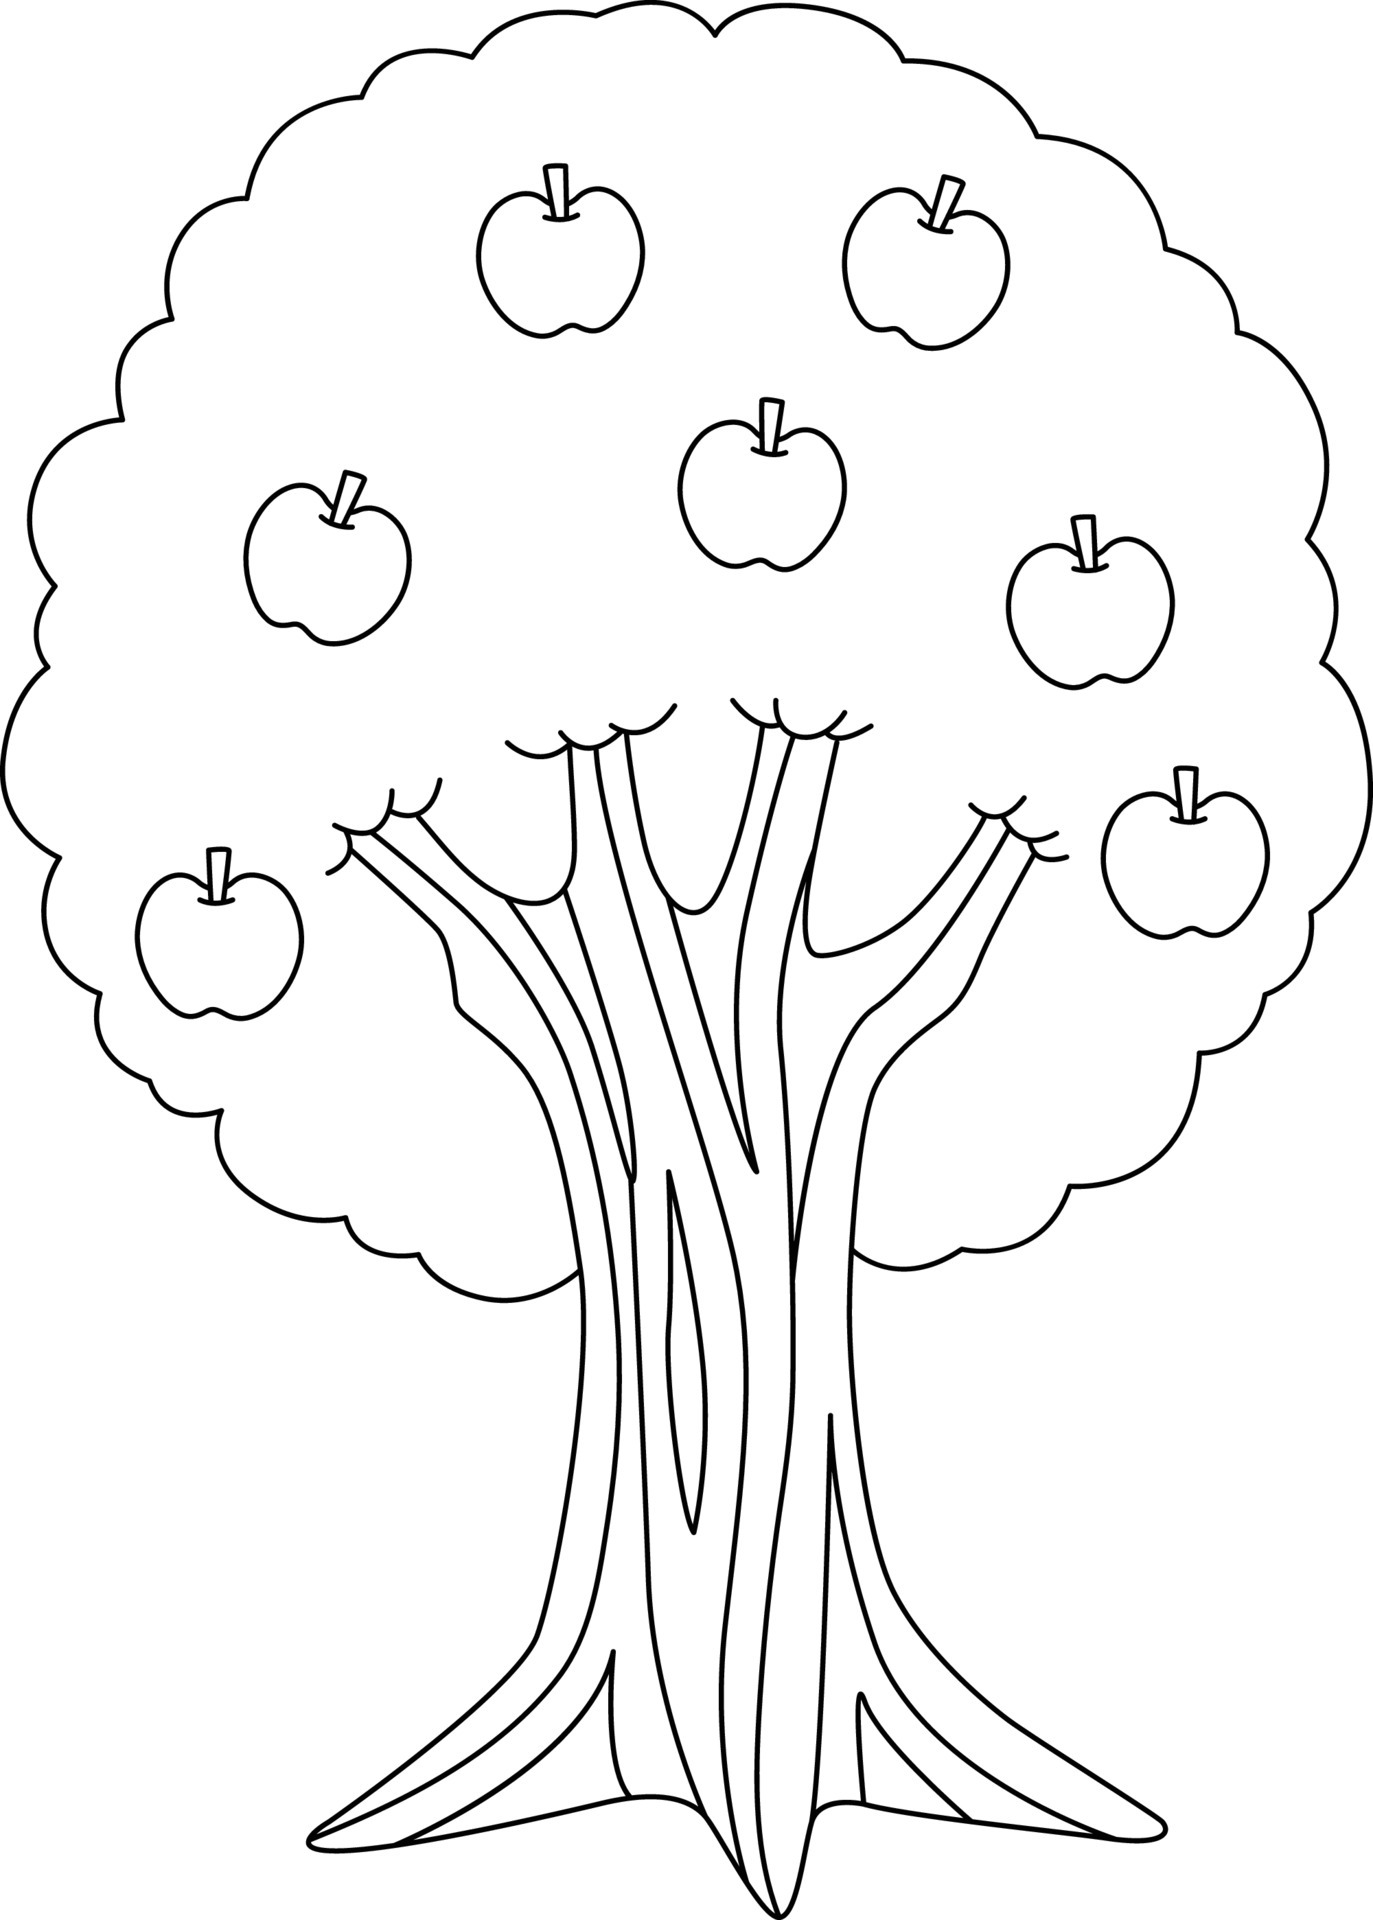 apple-tree-coloring-page-isolated-for-kids-5162985-vector-art-at-vecteezy